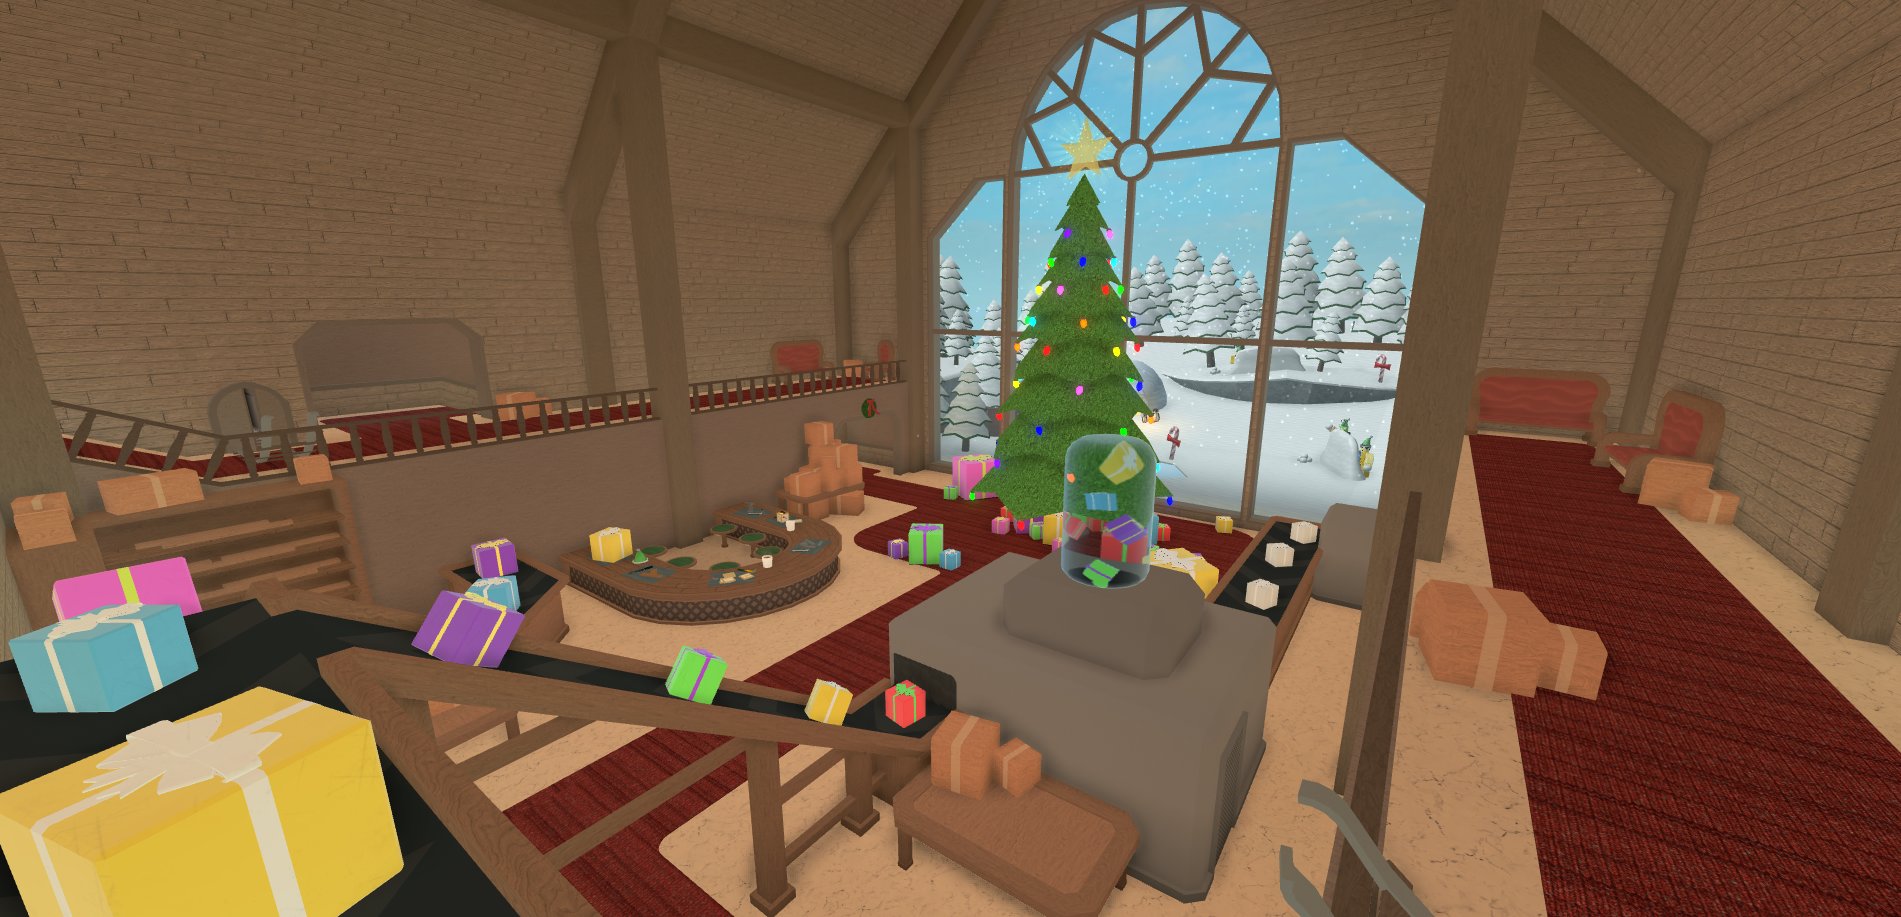 Zyleak Quinn On Twitter The Murder Mystery 2 Christmas Event Is Out What Do You Think Of The New Limited Time Workshop Map Play It Here Https T Co Suy56gtjsm Nikilisrbx Roblox - browse latest robloxchristmas instagram photos and videos